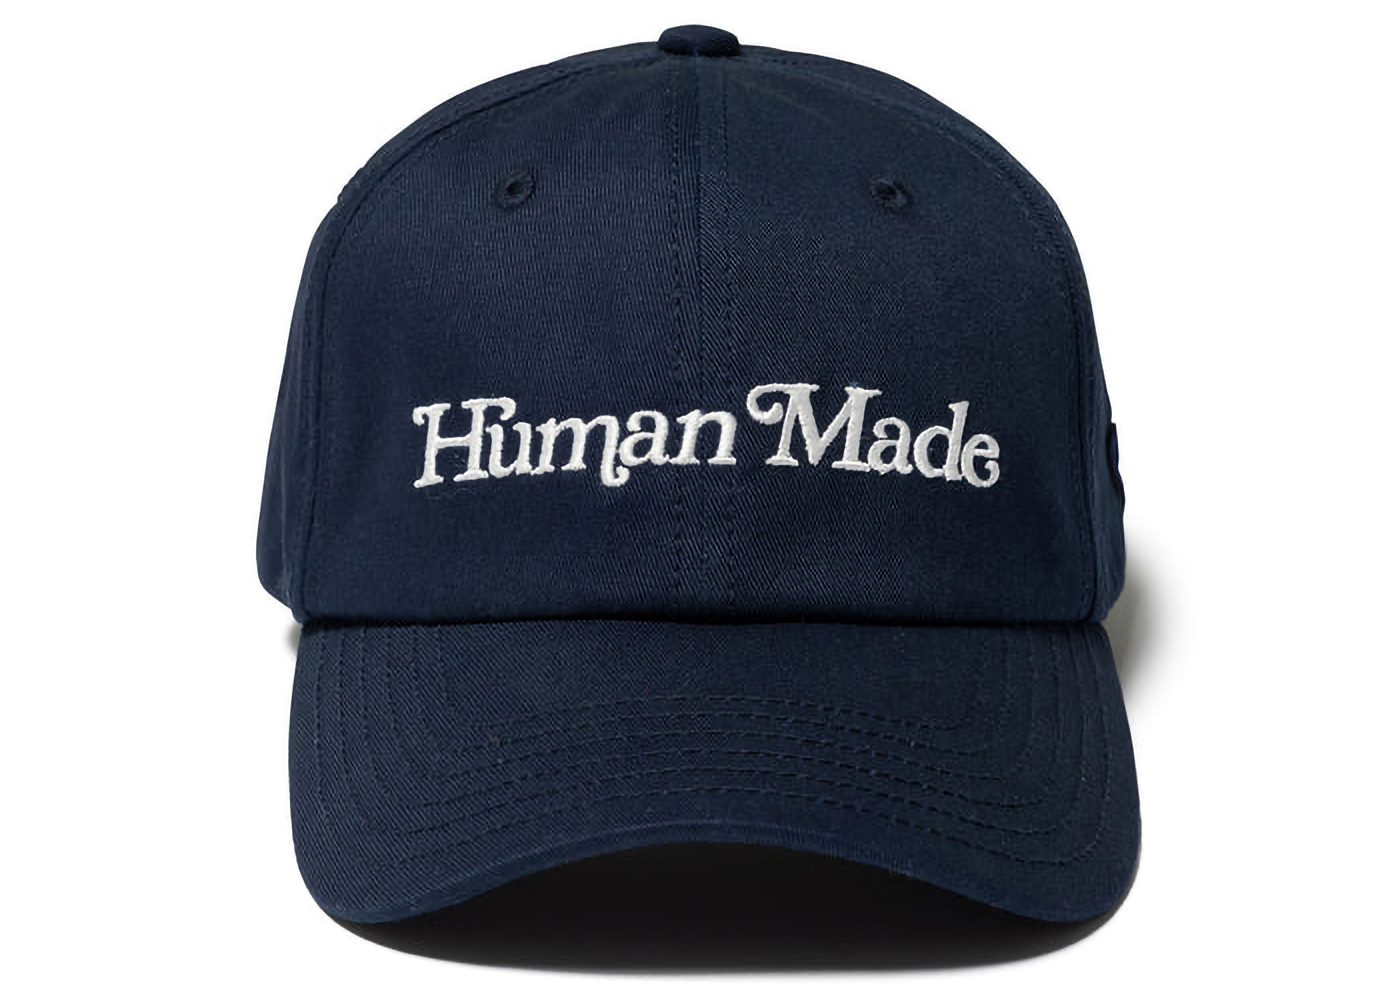 HUMAN MADE x Girls Don't Cry 6 Panel Cap